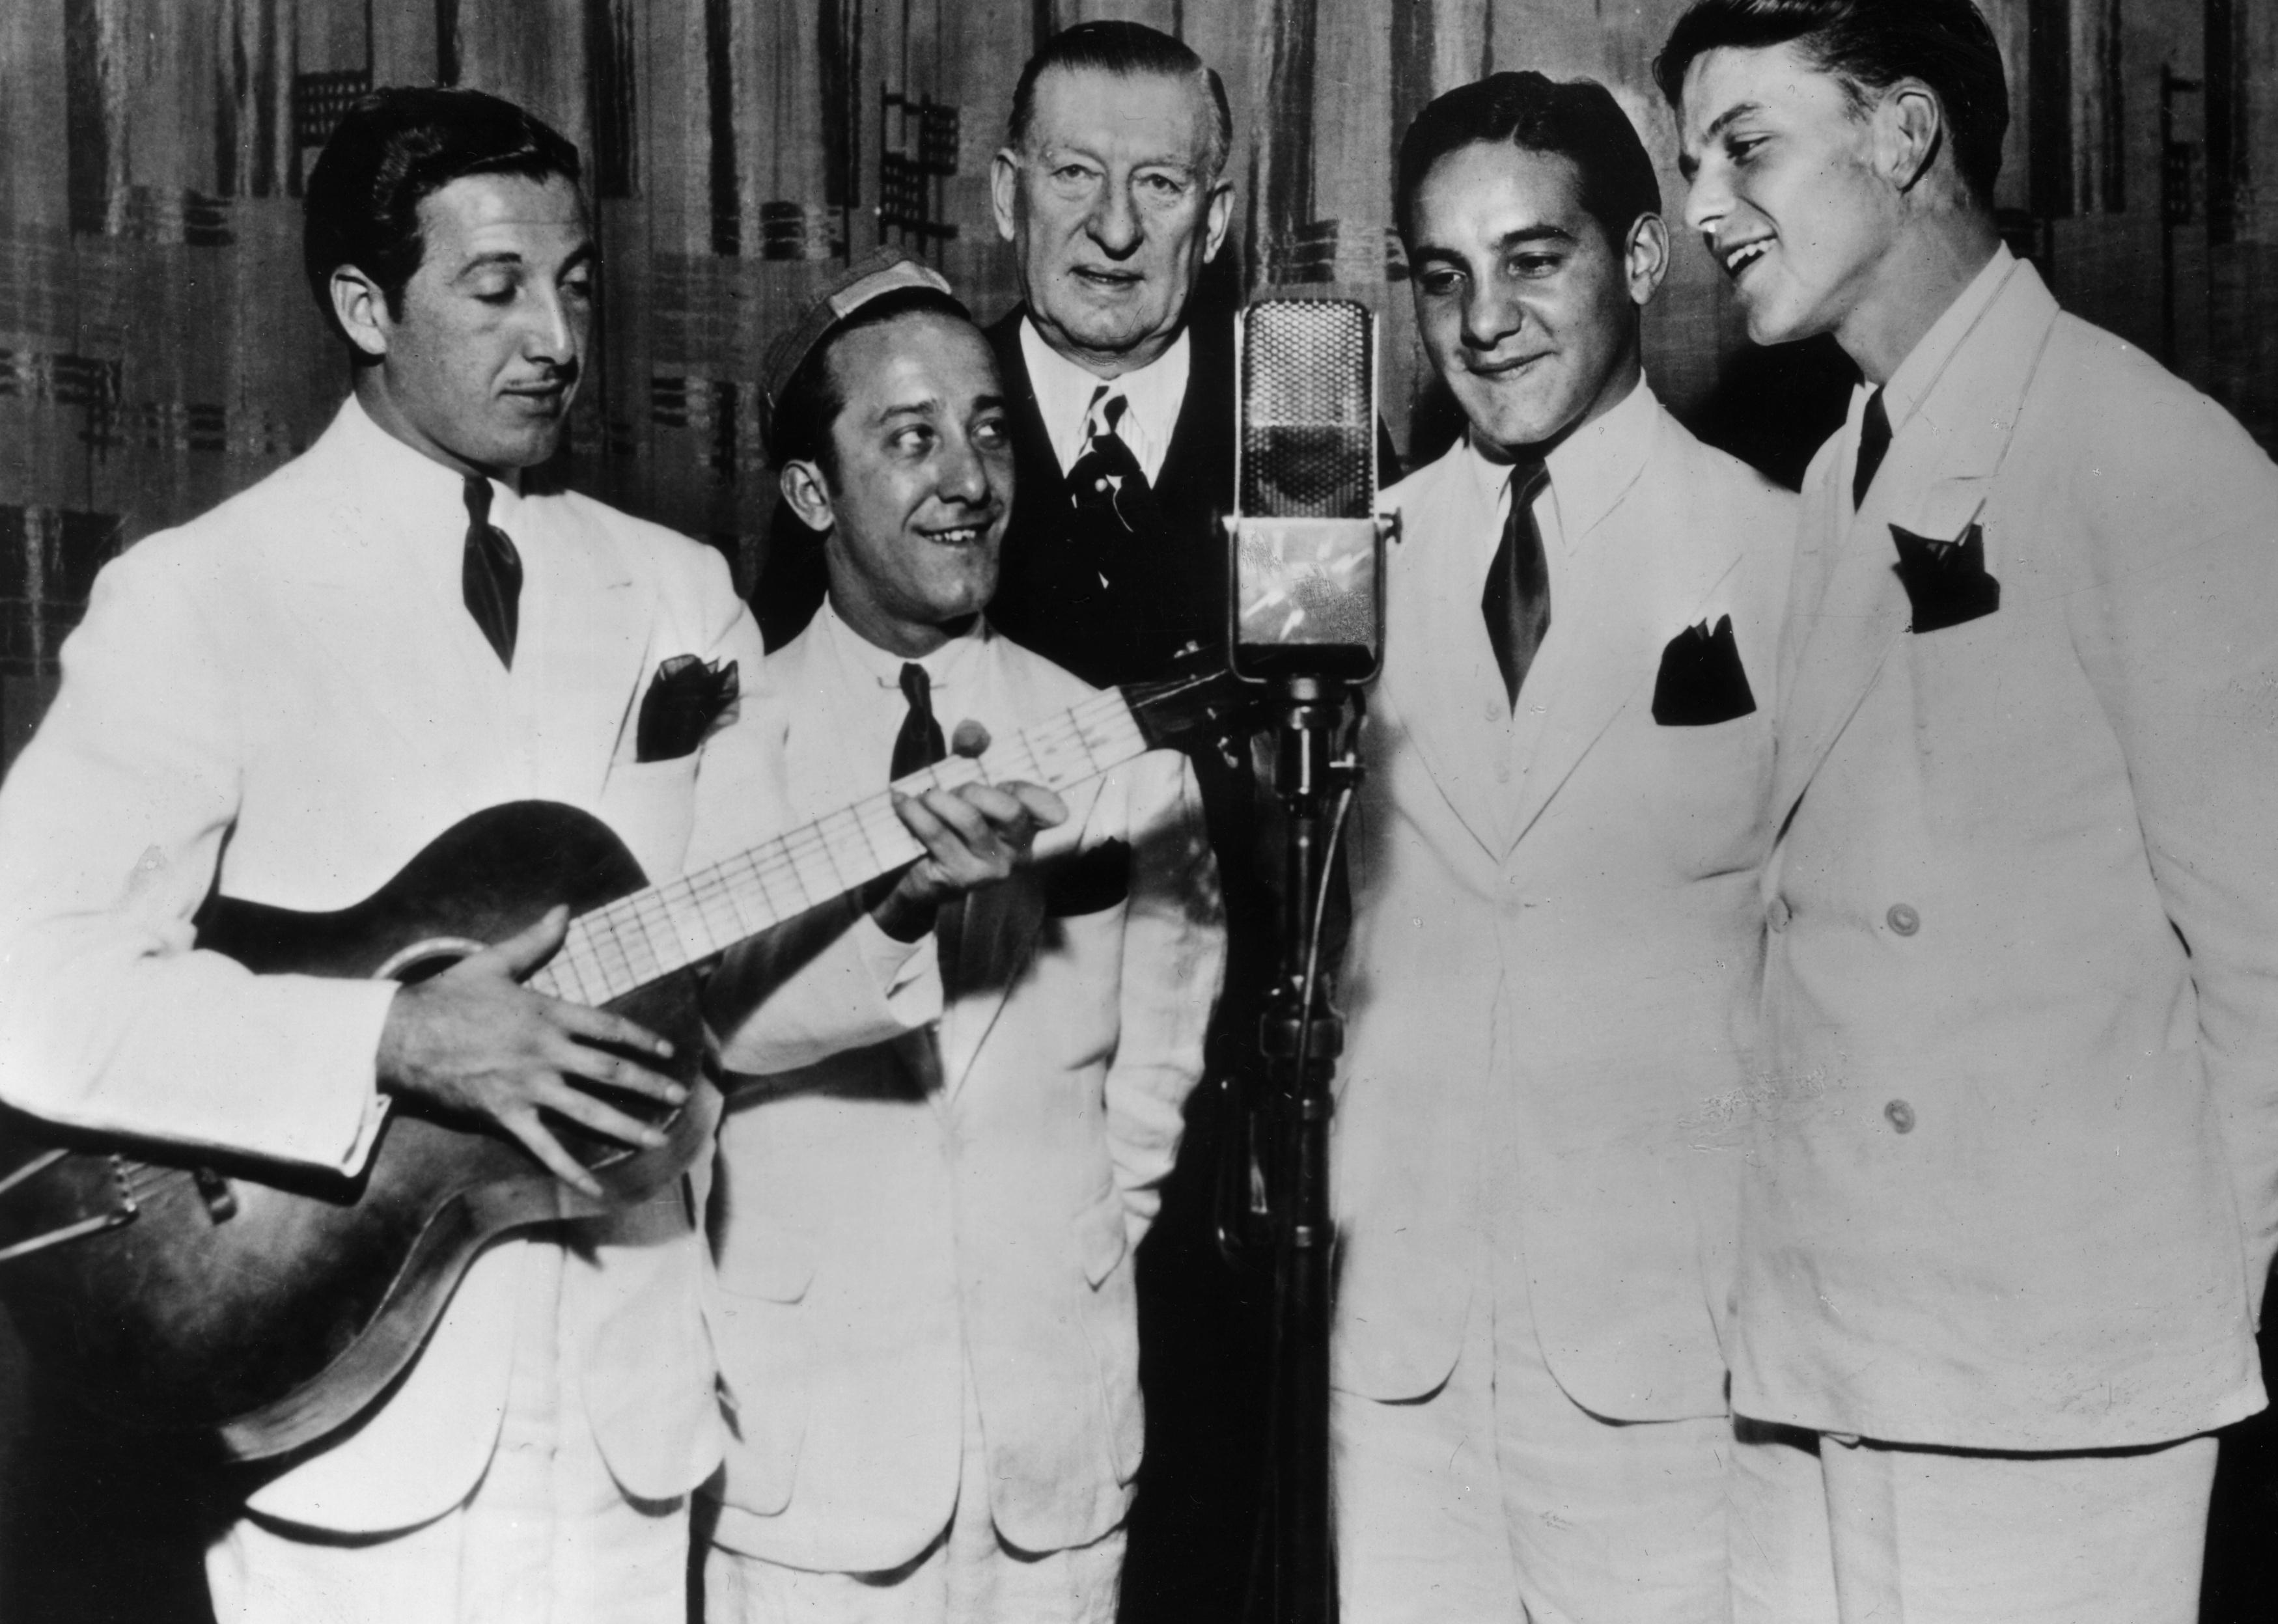 Frank Sinatra singing with The Hoboken Four on 